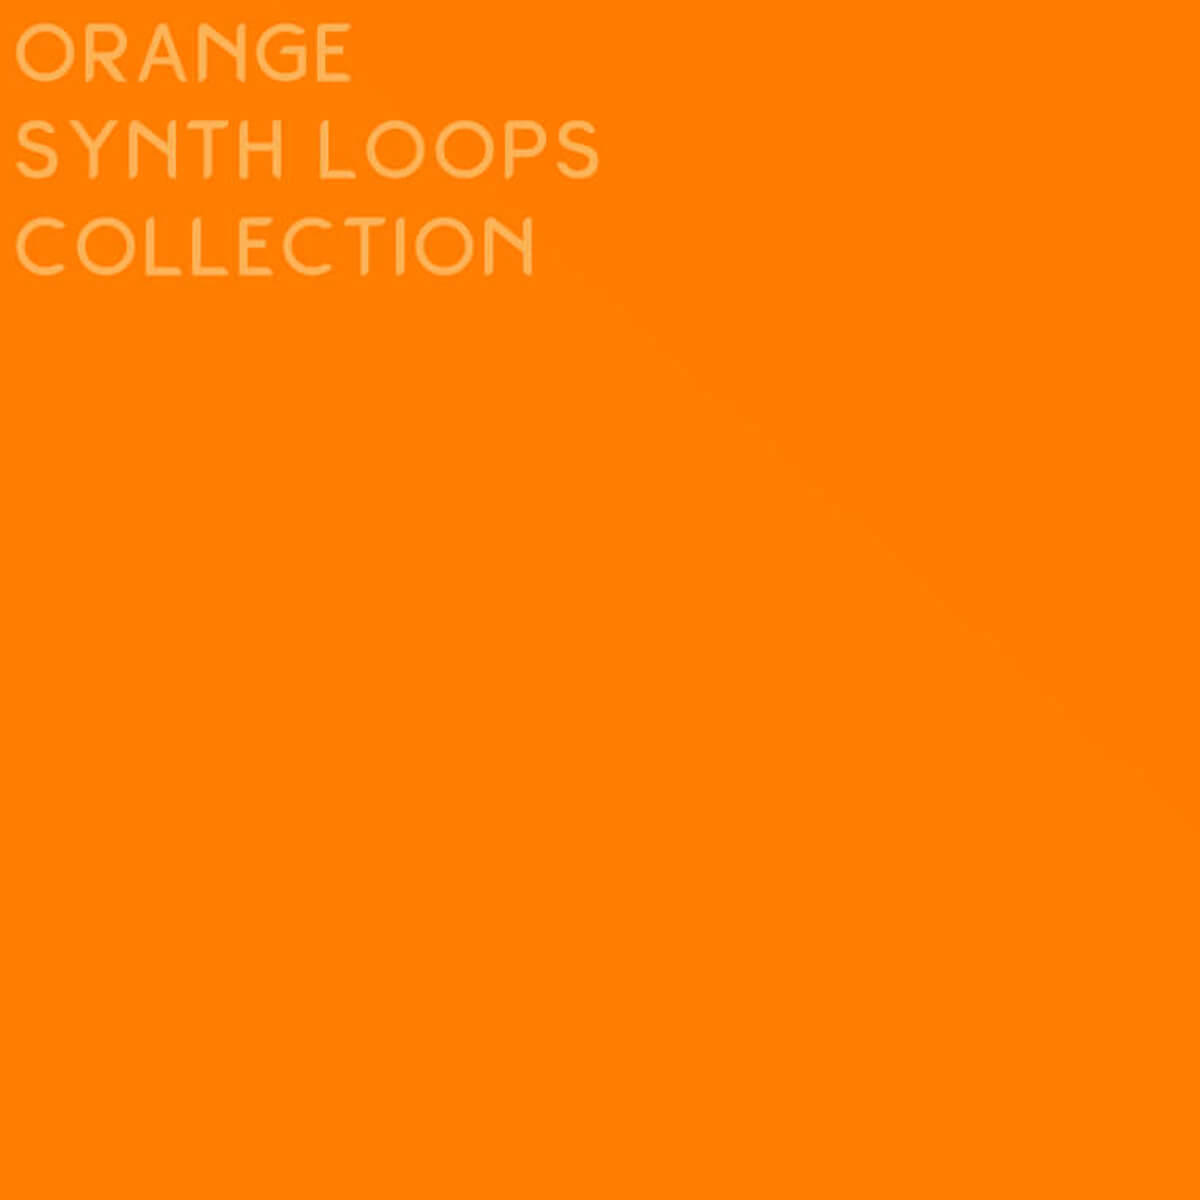 Orange Synth Loops Collection Vol. 1